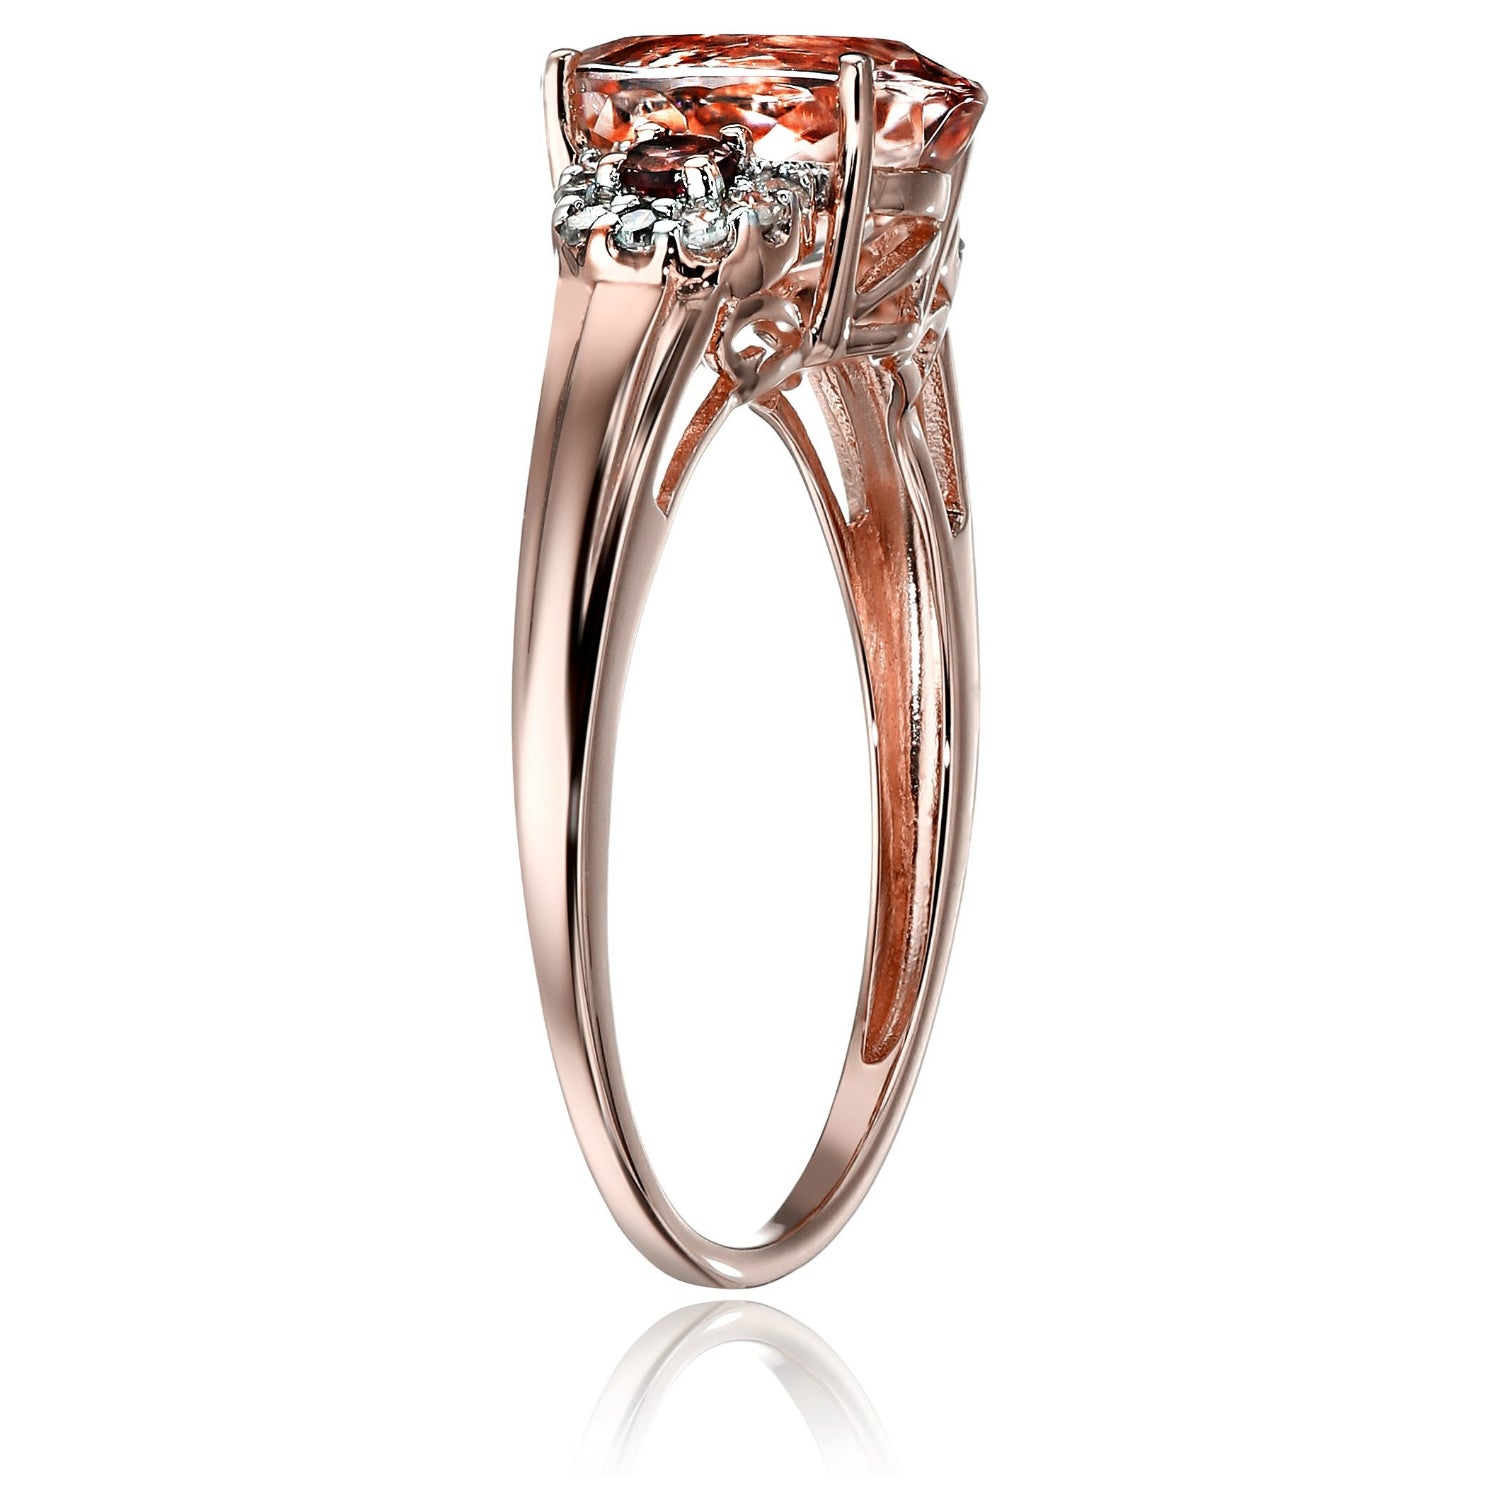 10k Rose Gold Morganite, Pink Tourmaline and Diamond 3-Stone Engagement Ring (1/10cttw, H-I Color, SI1-SI2 Clarity), - pinctore